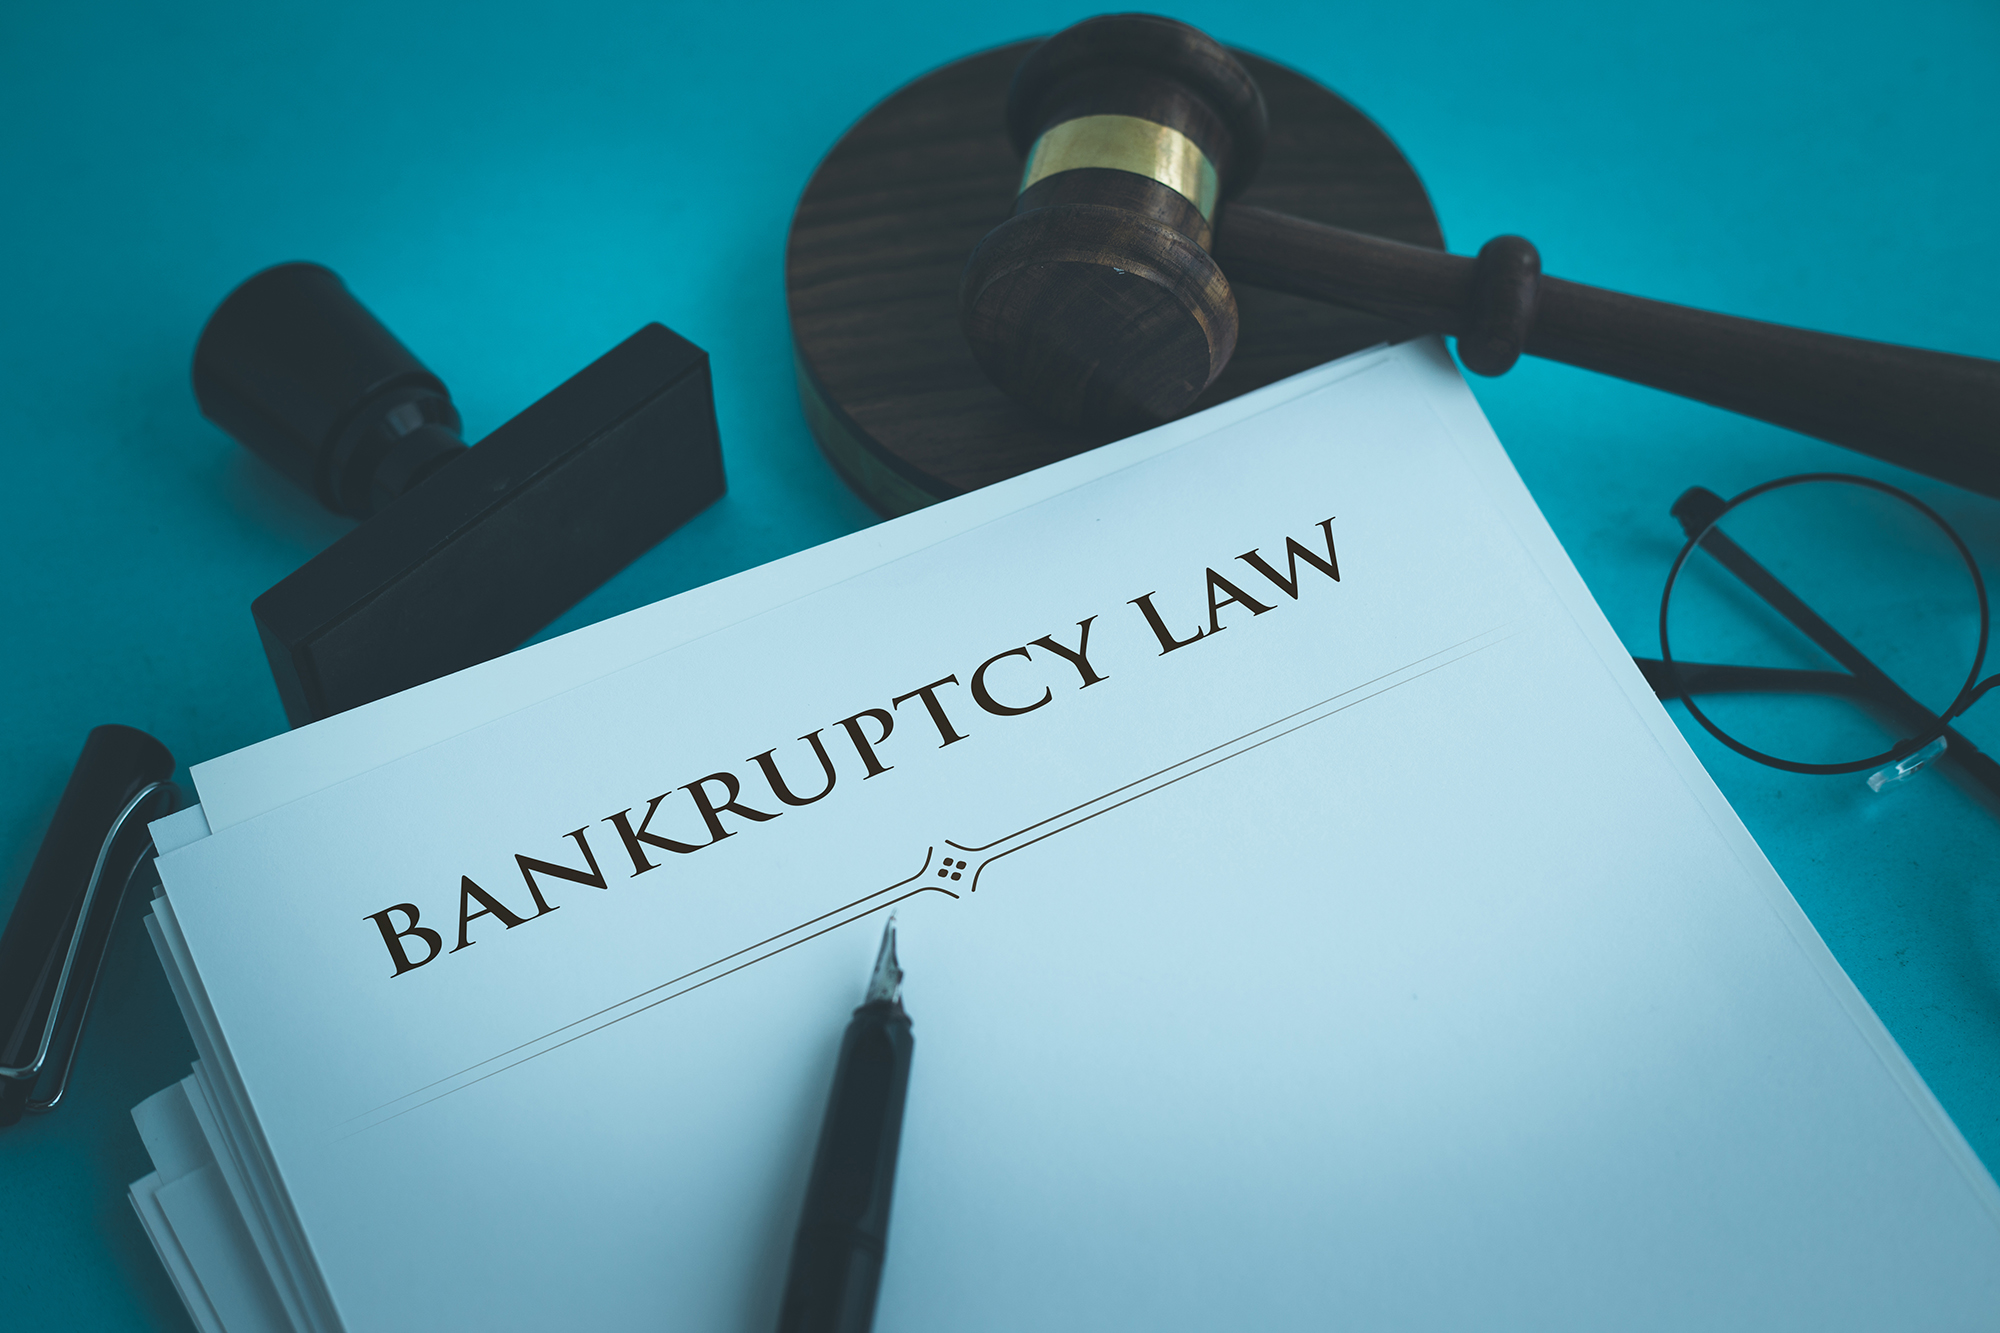 Bankruptcy Law Concept